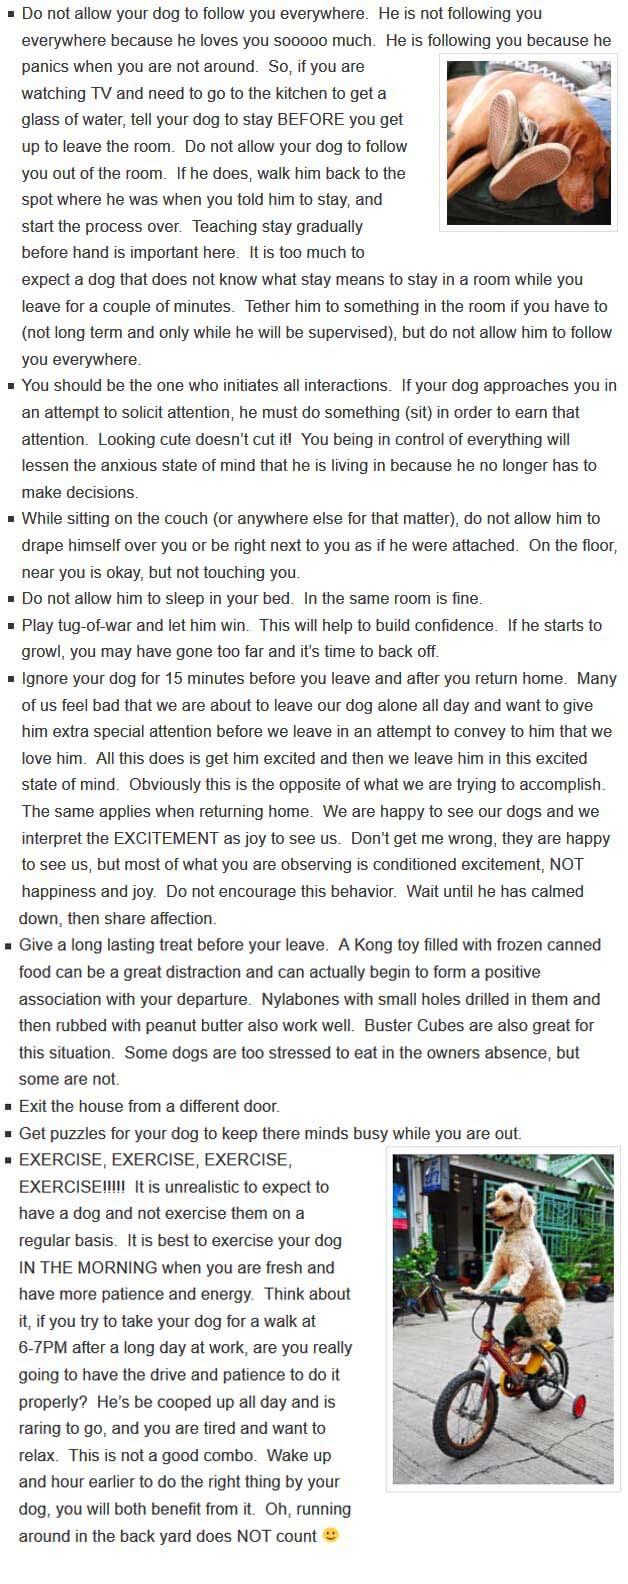 SEPARATION ANXIETY CURE TIPS by WWW.THEBALANCEDCANINE.COM